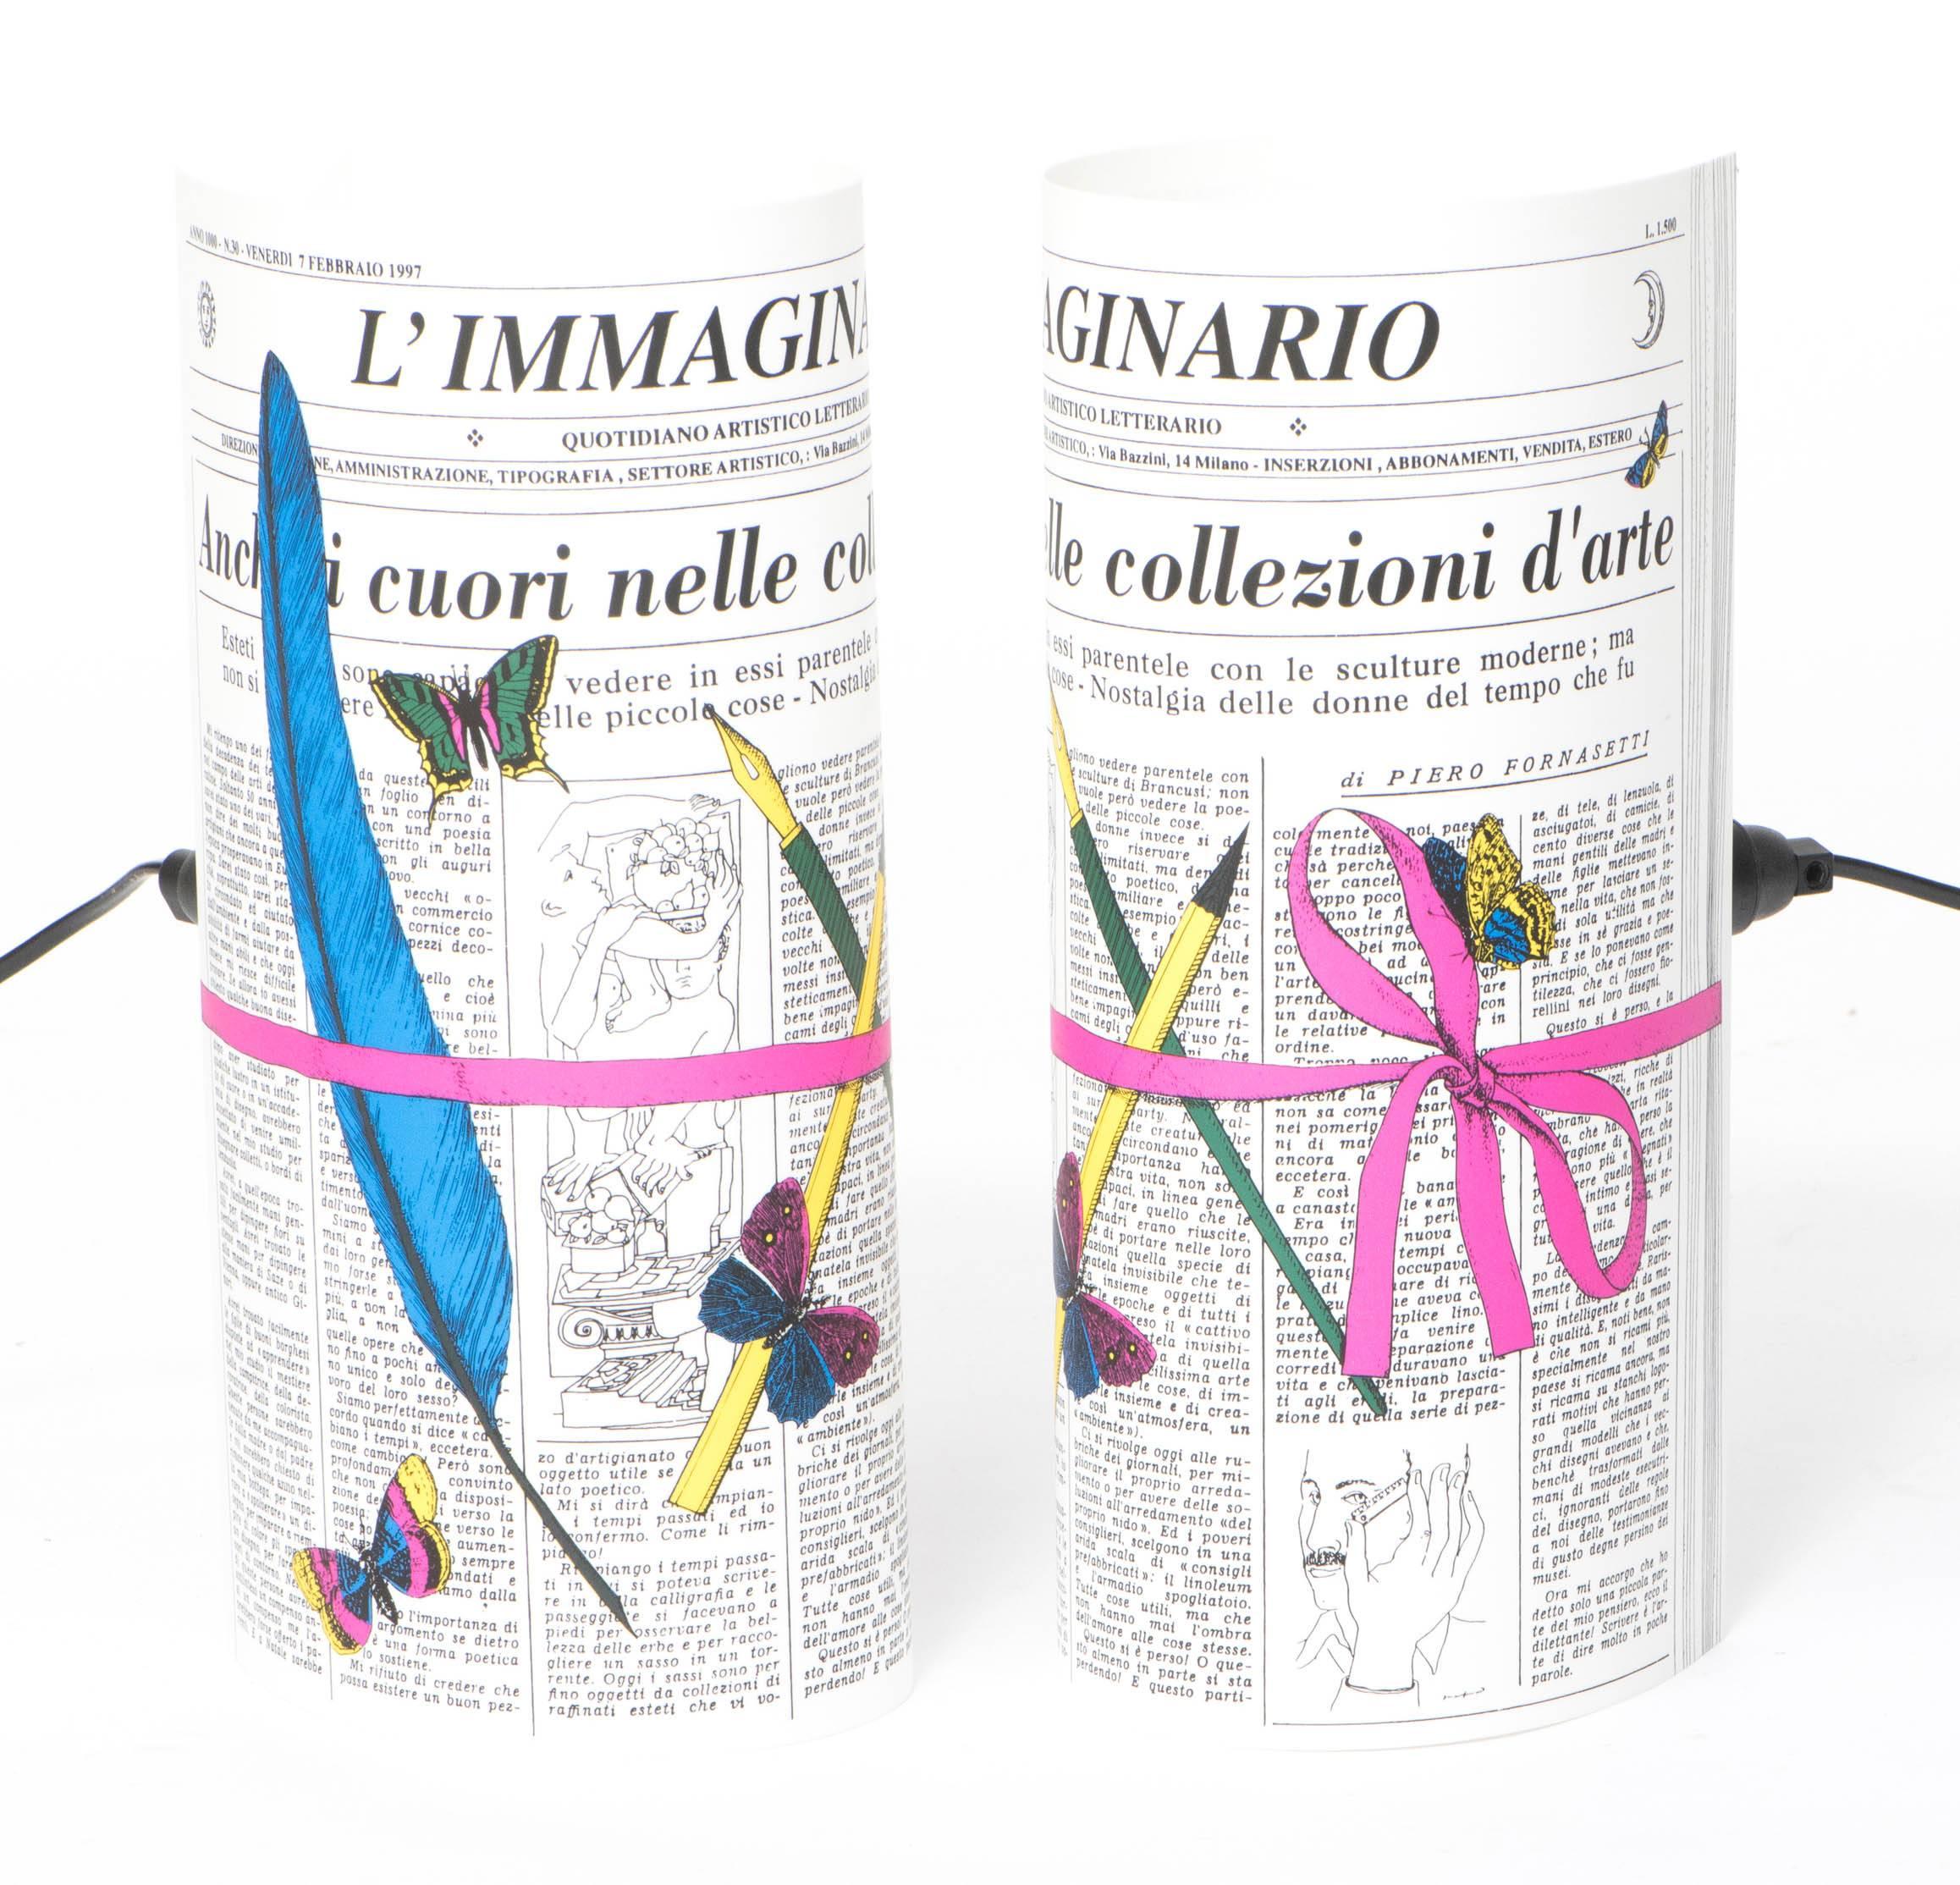 A pair of small table lamps by Barnaba Fornasetti
“Immaginario”
Printed and colored perspex
Made by Fornasetti and Antonangeli Iluminazione.
Paderno Dugano.
Italy, 1995
Measure: 33 cm high x 12 cm wide x 16 cm deep.
 